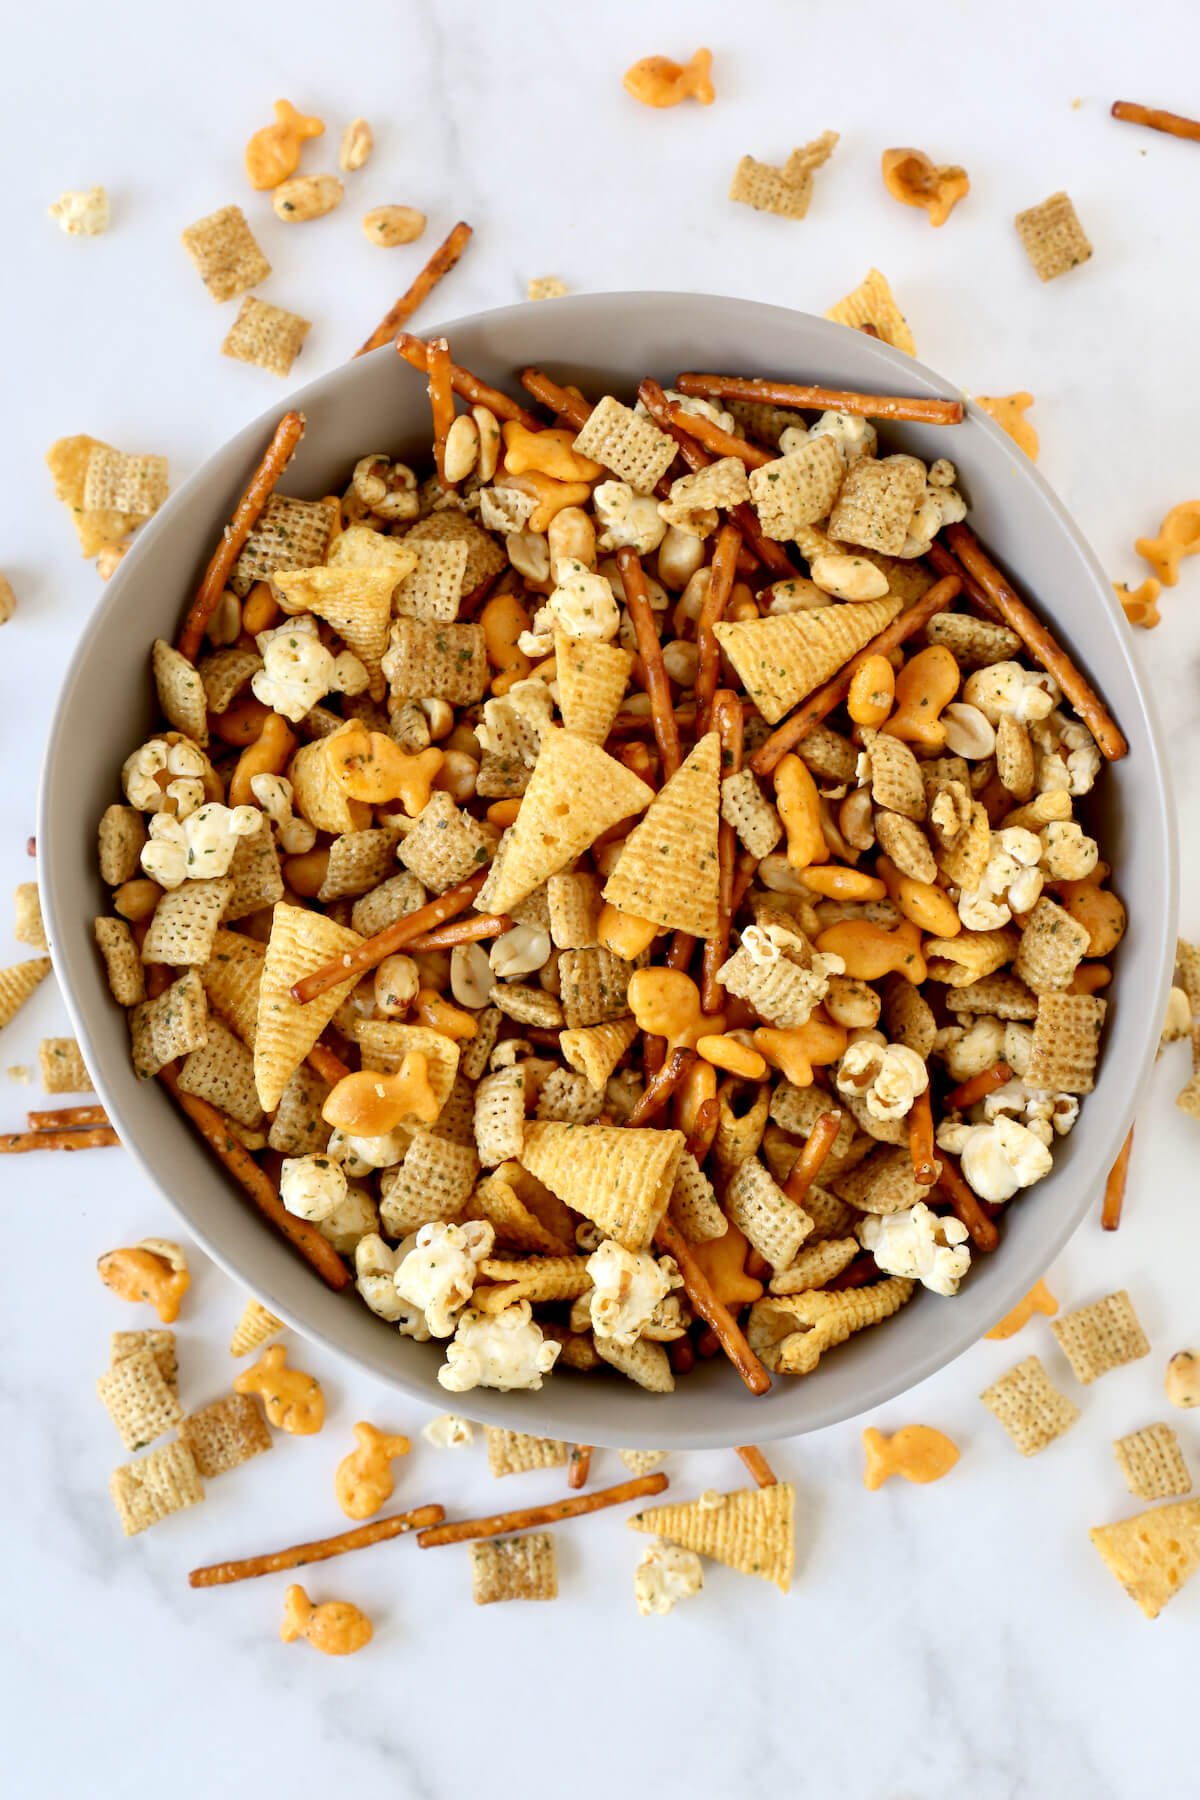 A gray bowl filled with seasoned pretzels, bugels, gold fish, popcorn, peanuts and chex cereal.